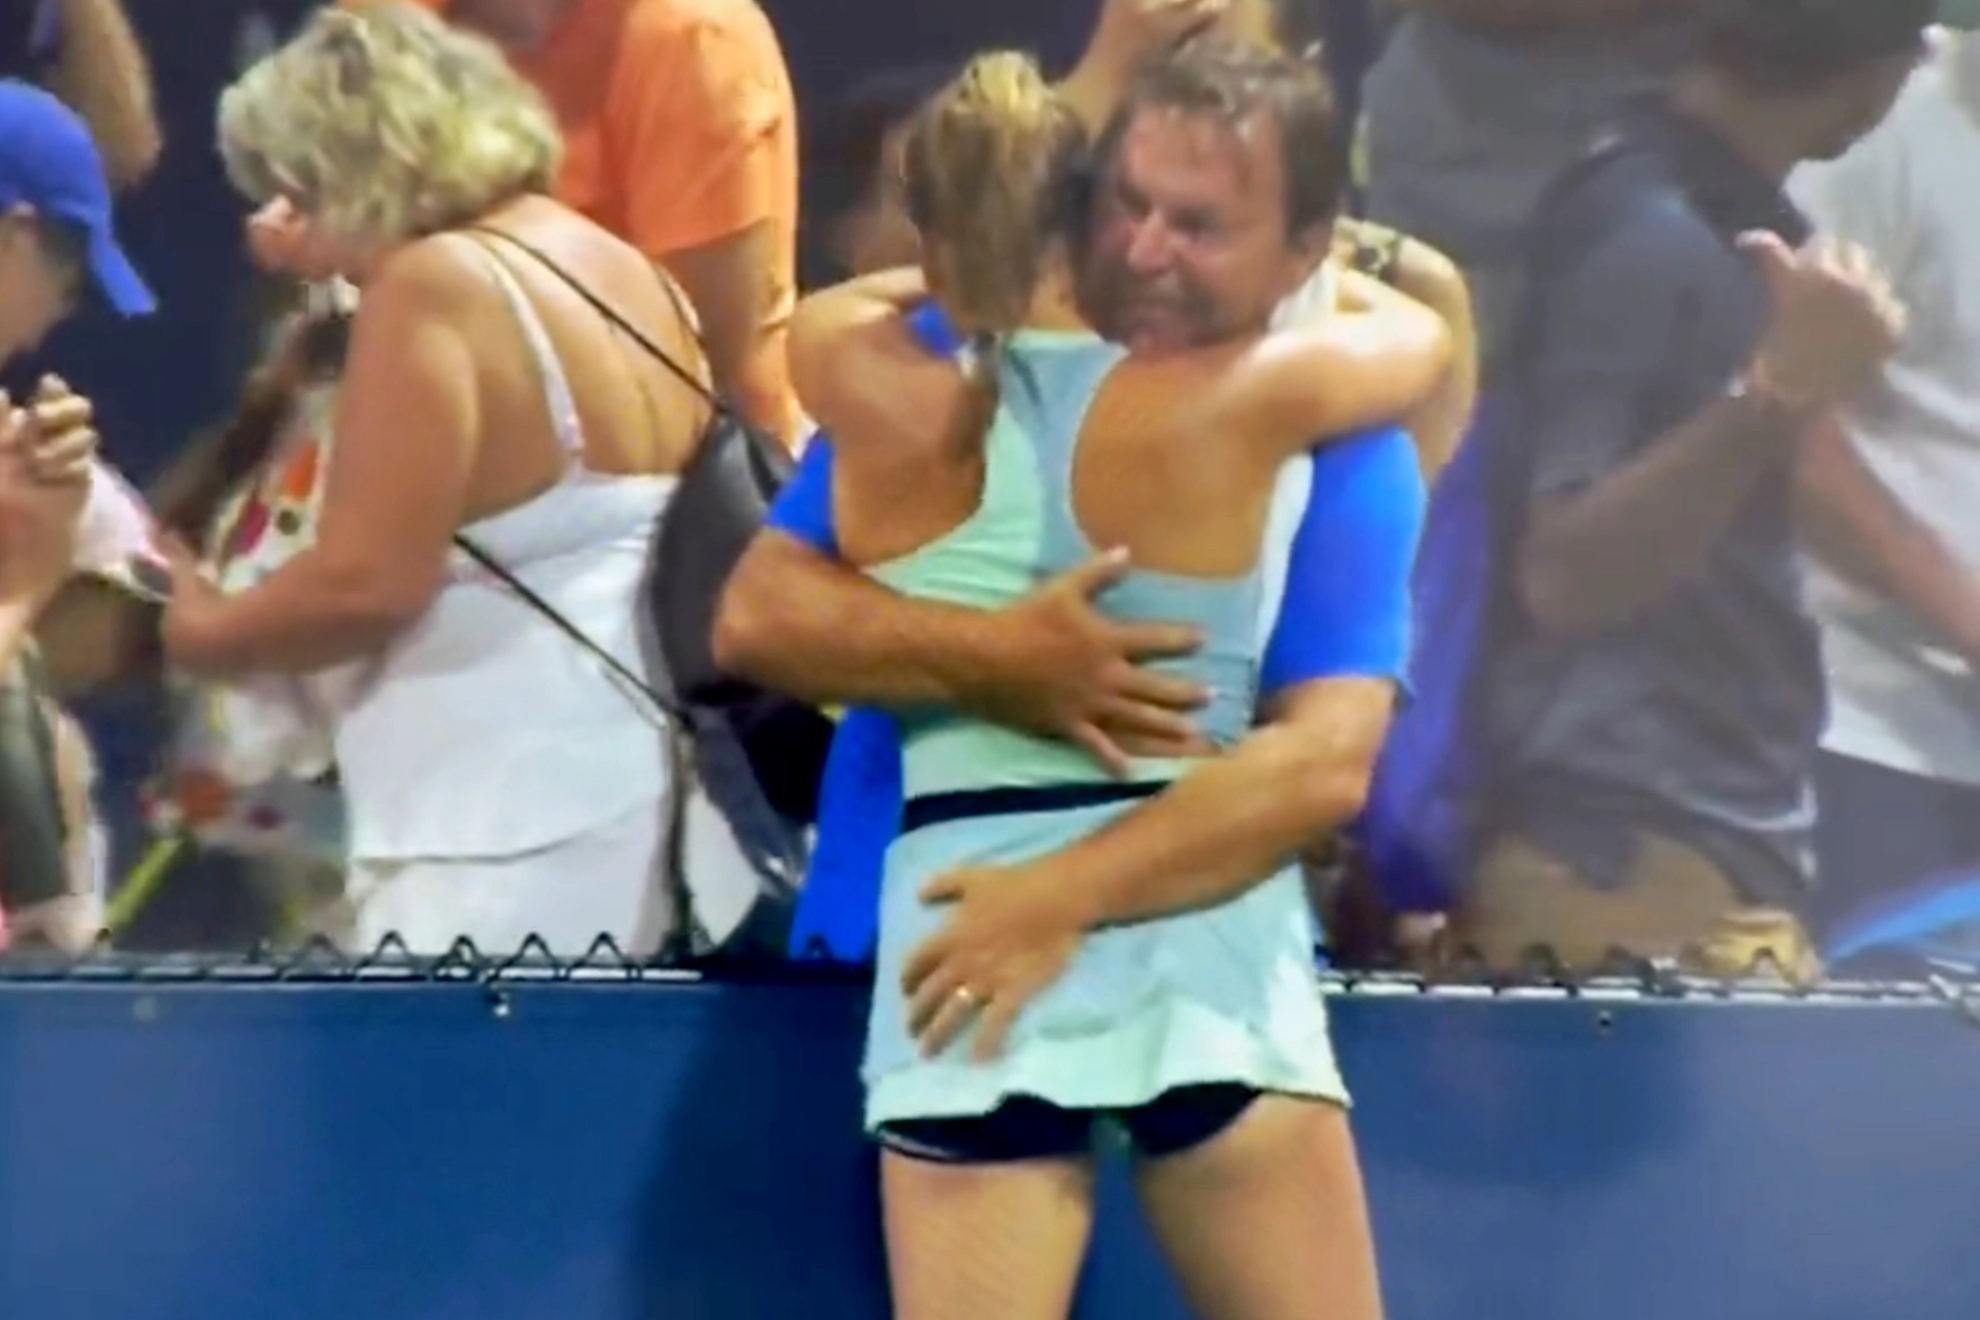 Scandalous video at the US Open! 16-year-old Czech tennis gets spanked by her dad and coach | Marca